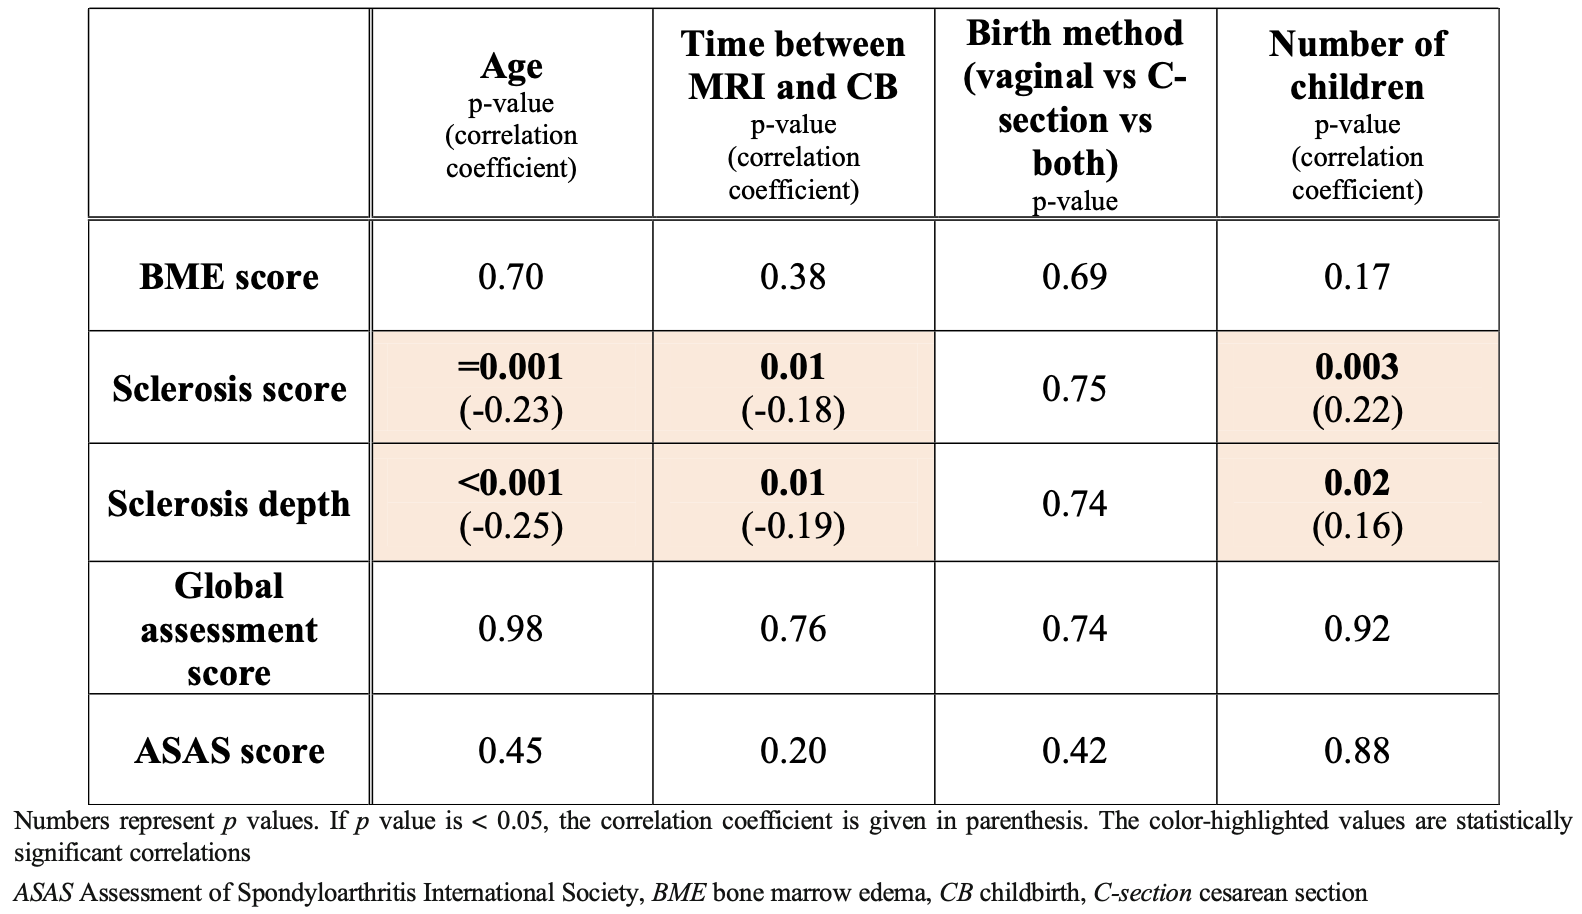 Table illustrates the influence of age and childbirth-related factors on BME, sclerosis, overall assessment score, and ASAS score.